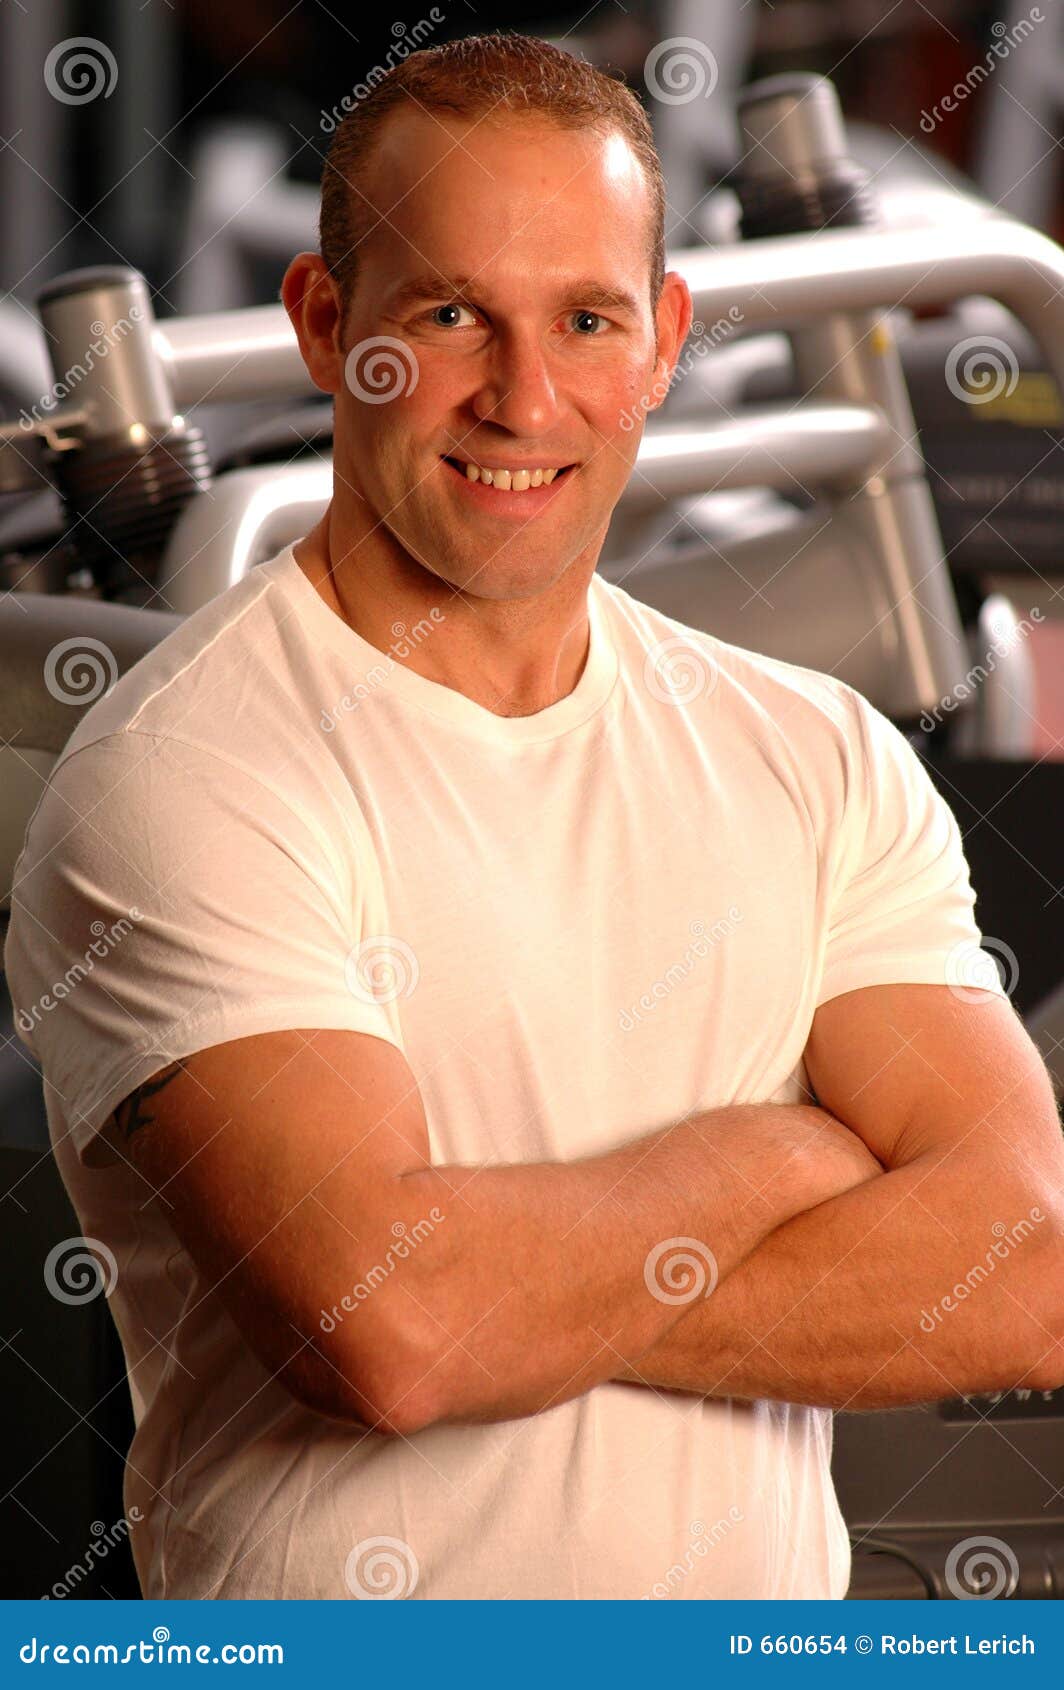 35,366 Weight Loss Equipment Stock Photos - Free & Royalty-Free Stock  Photos from Dreamstime